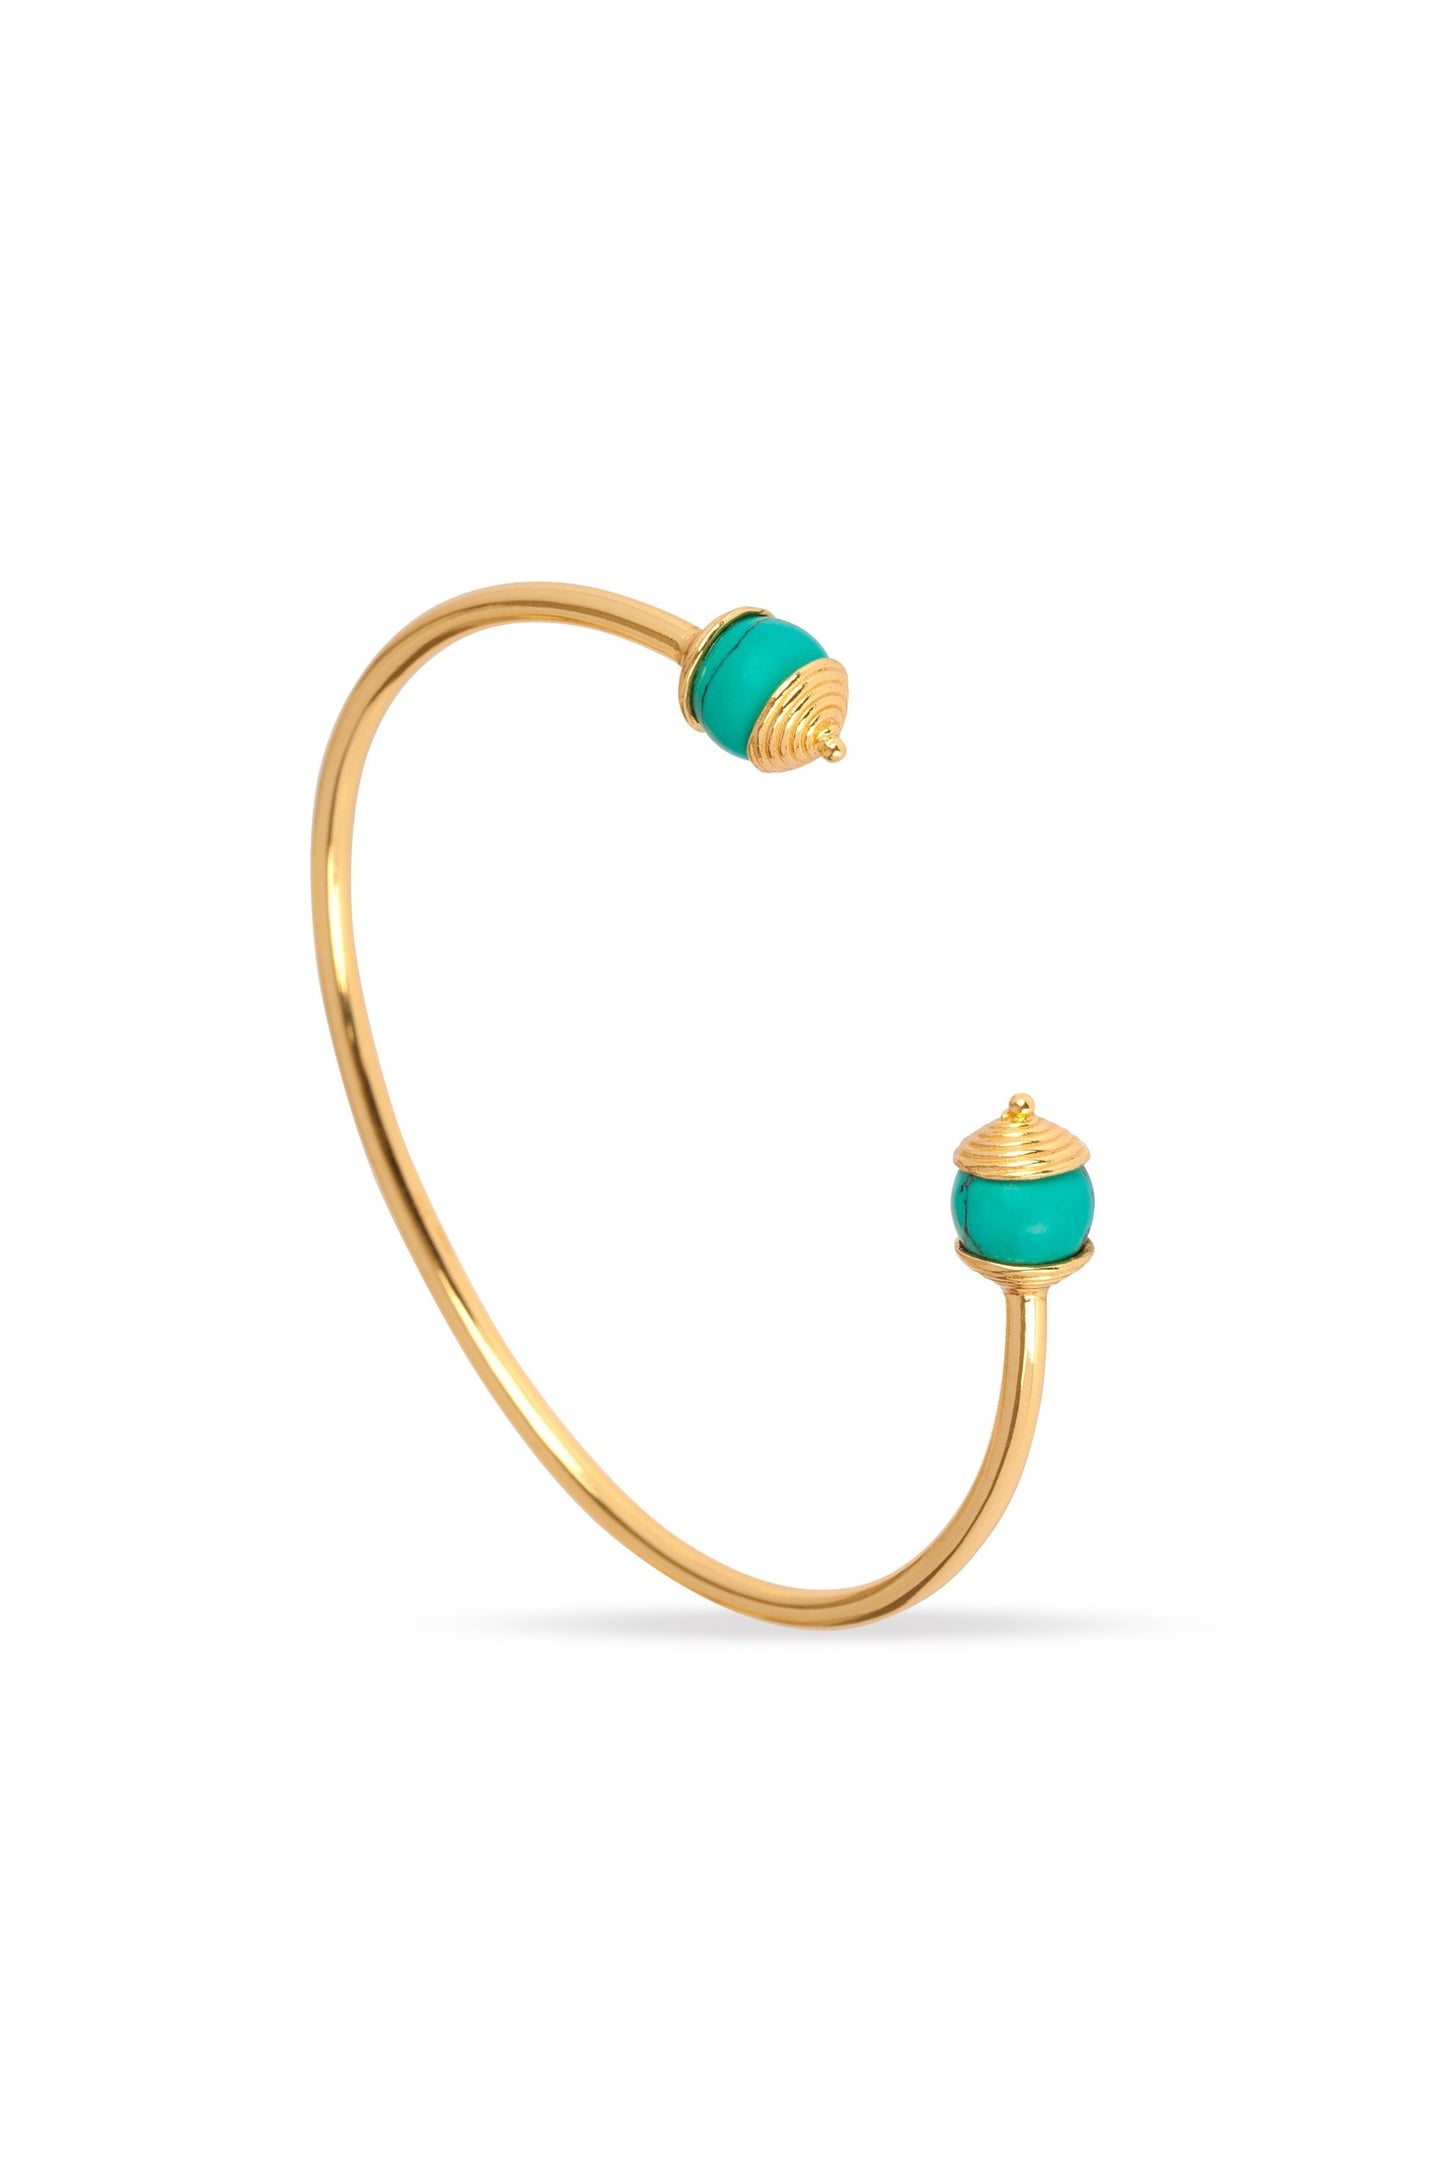 Turquoise & Gold Bangle For Luck, Protection and Health